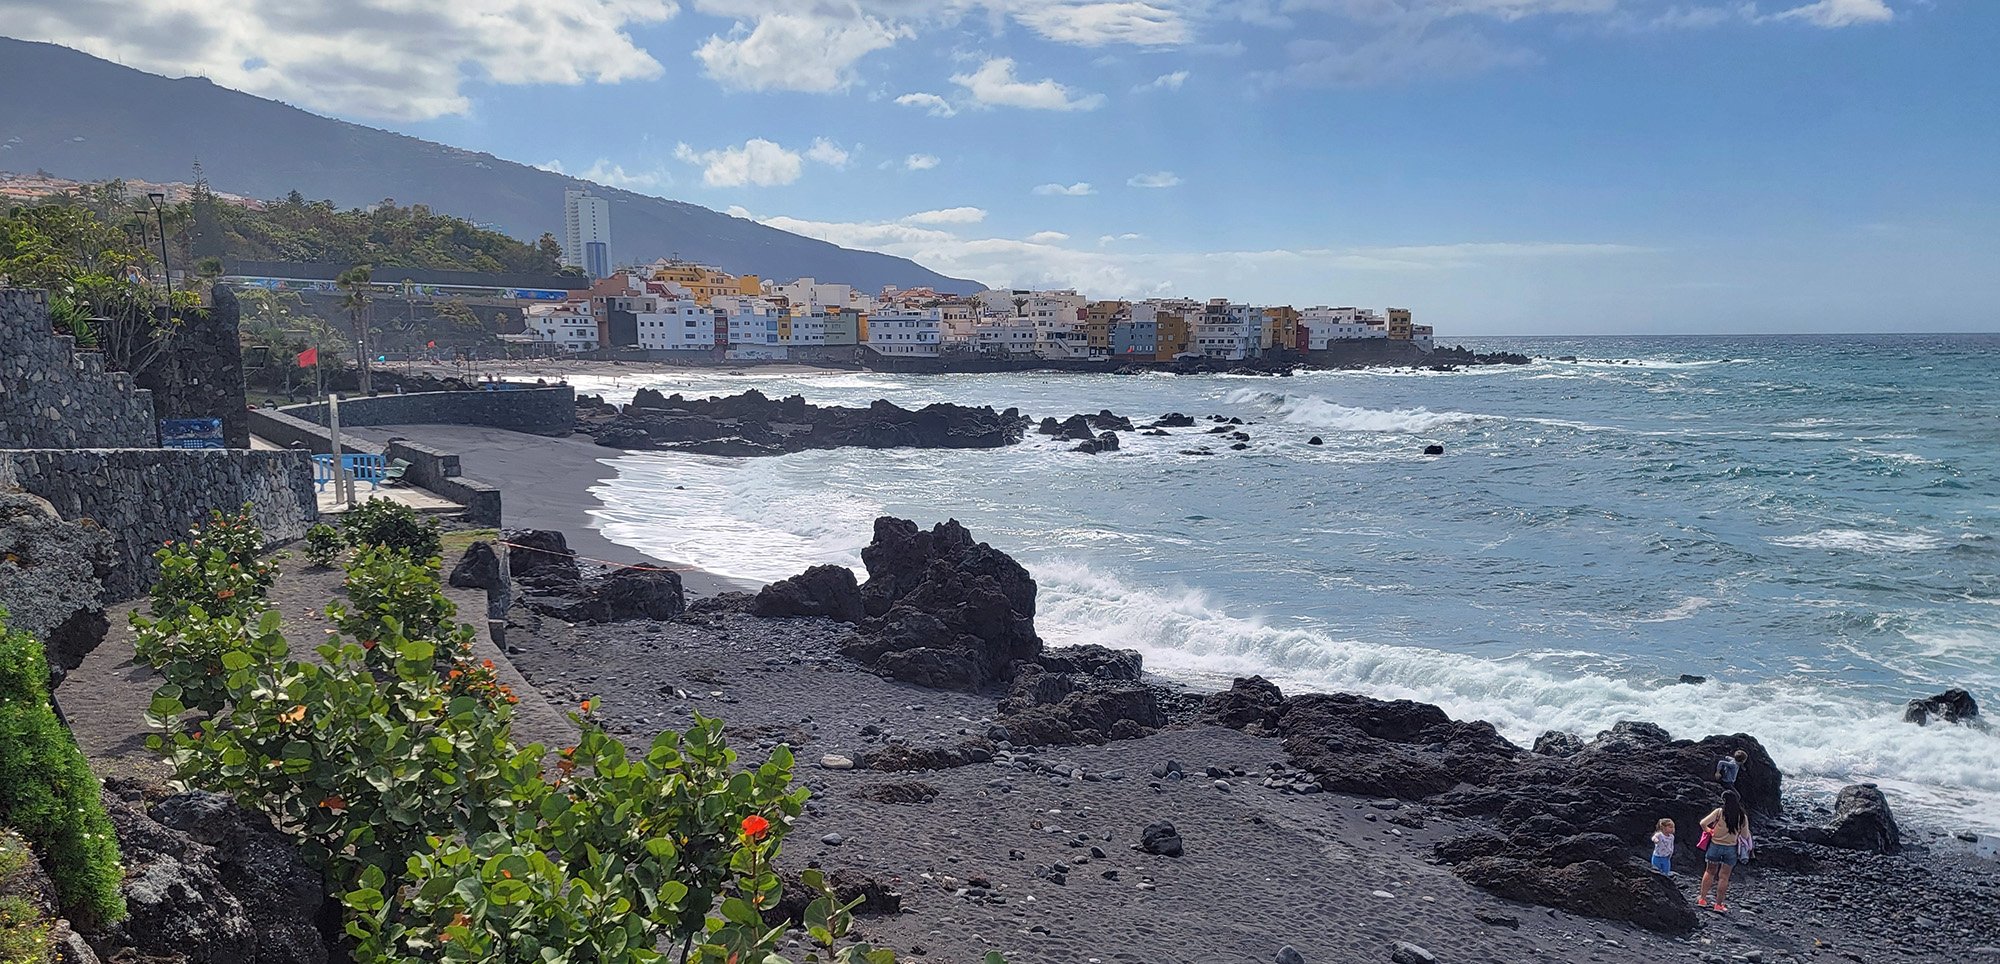 More epic views of the black volcanic sand beaches.